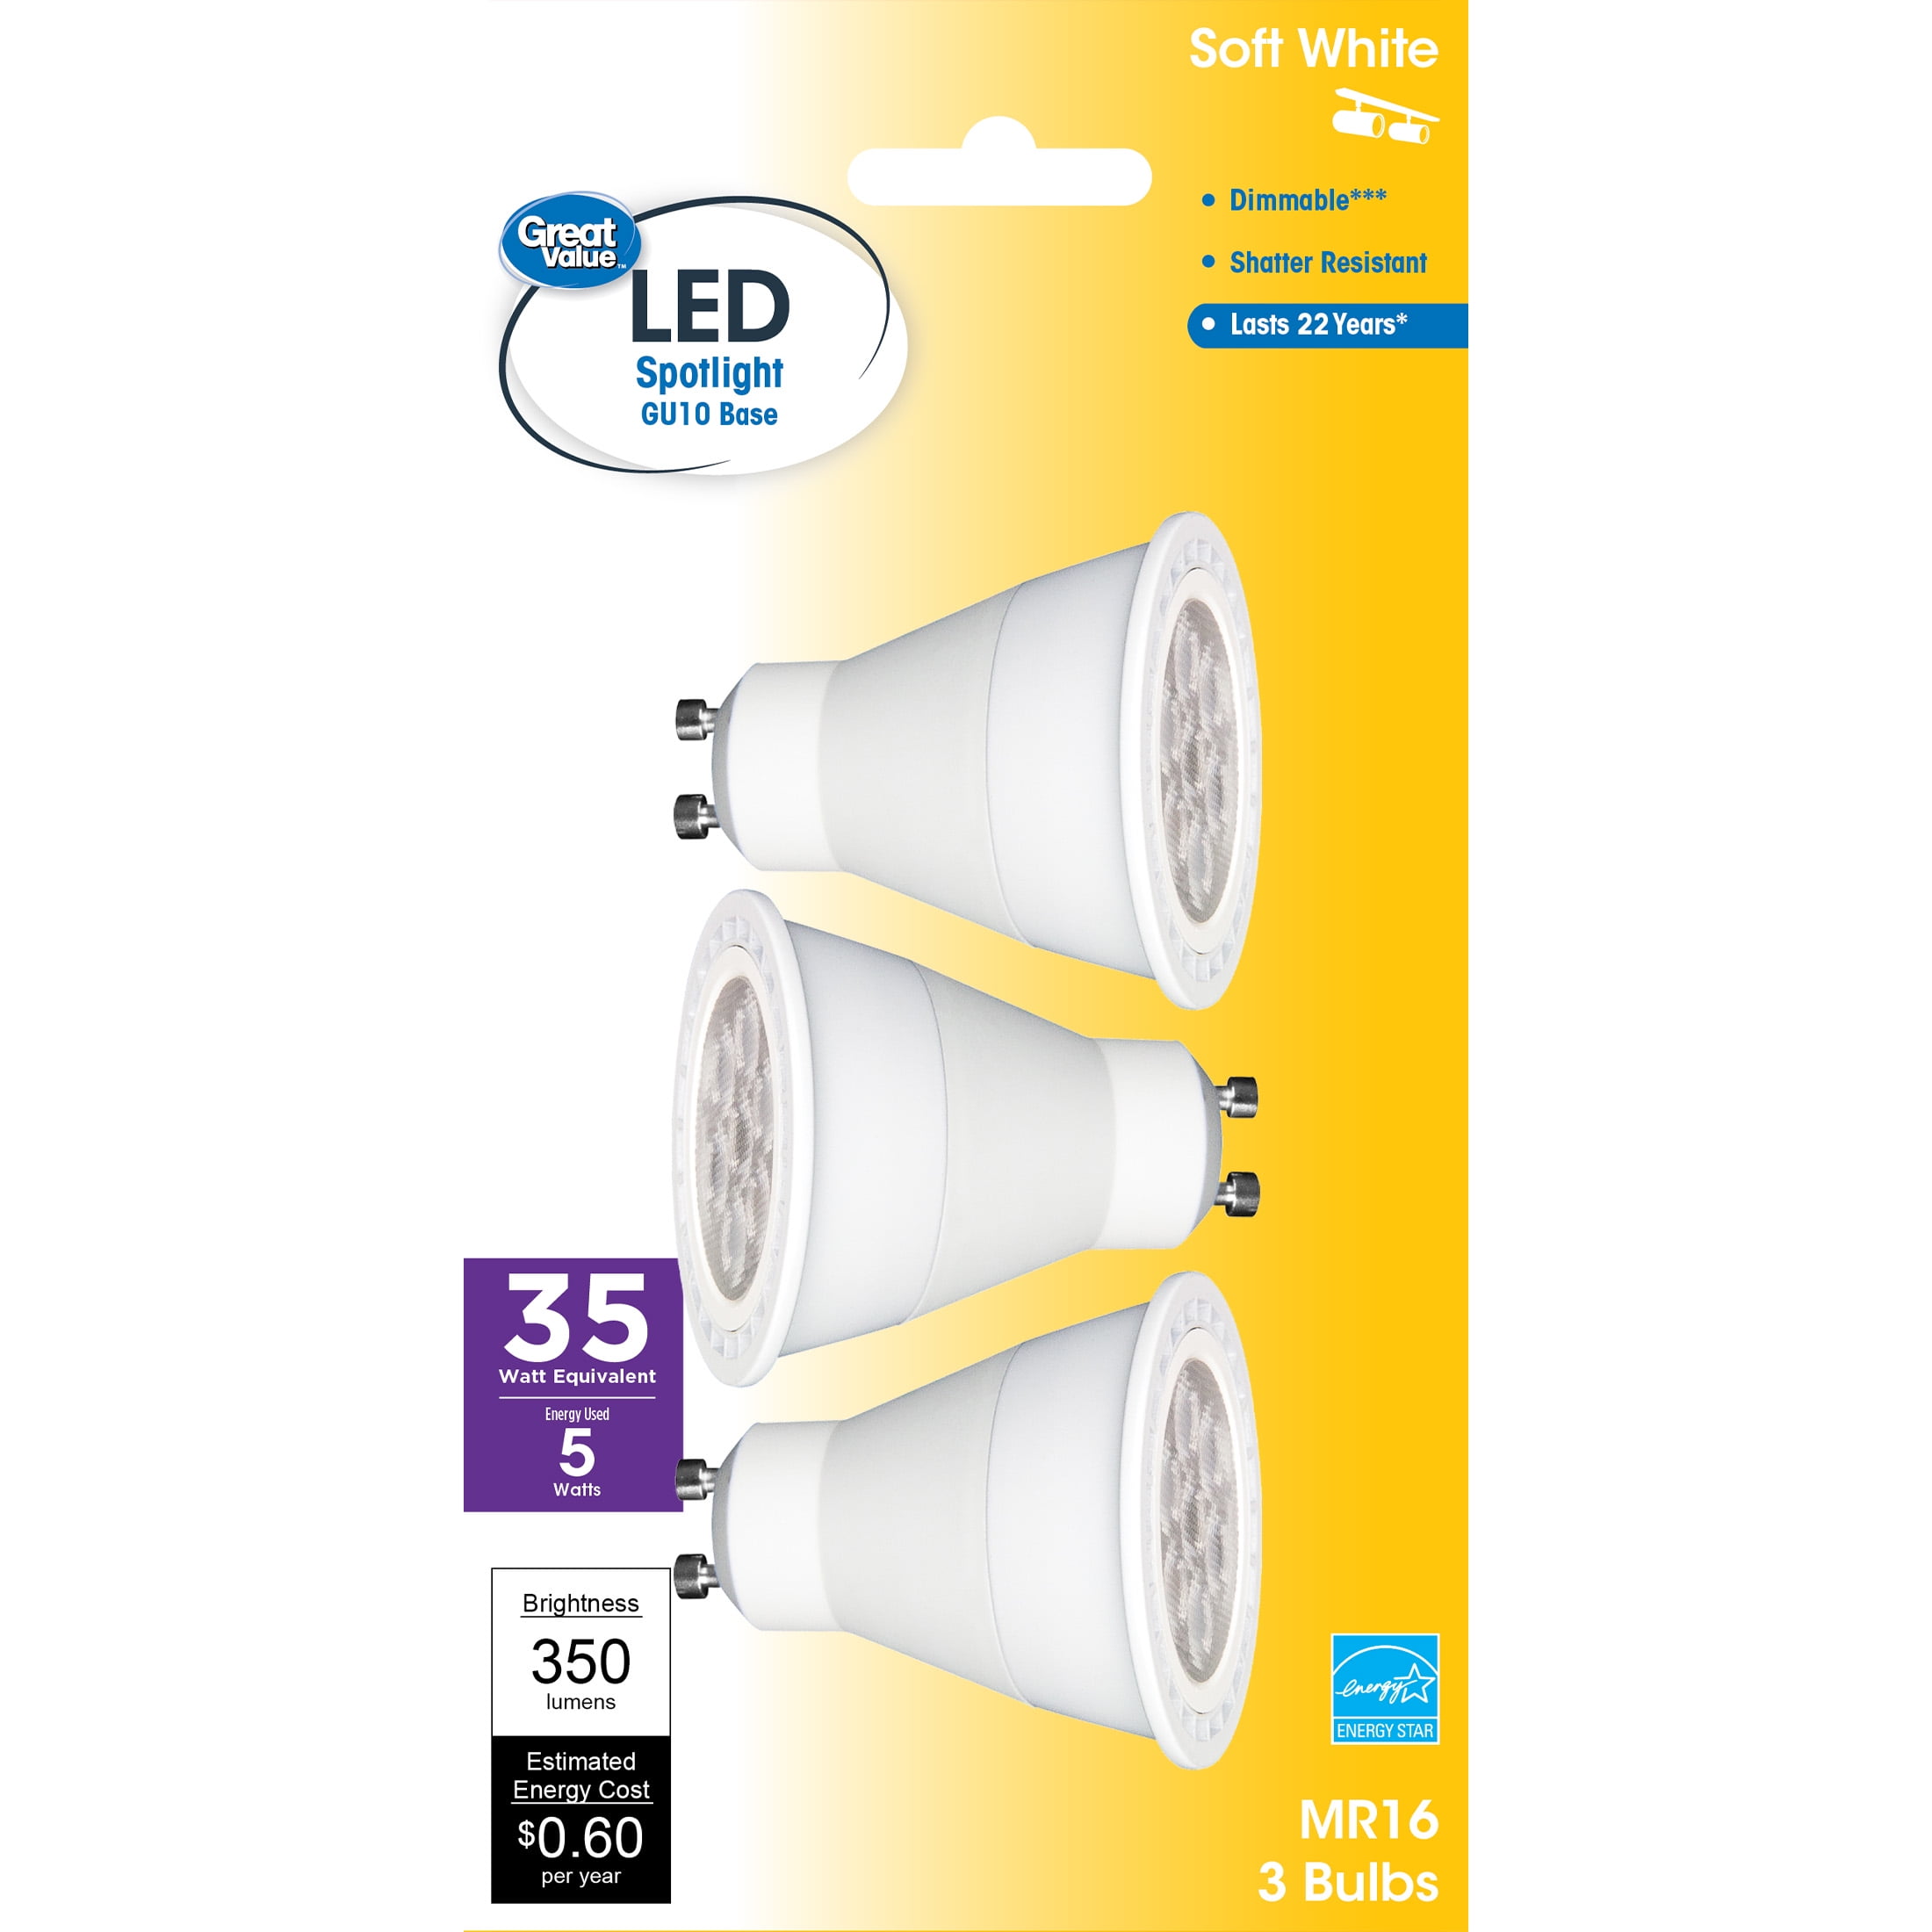 Great Value LED Light Bulb, 5W (35W Equivalent) MR16 Lamp GU10 Base, Dimmable, Soft White, 3-Pack